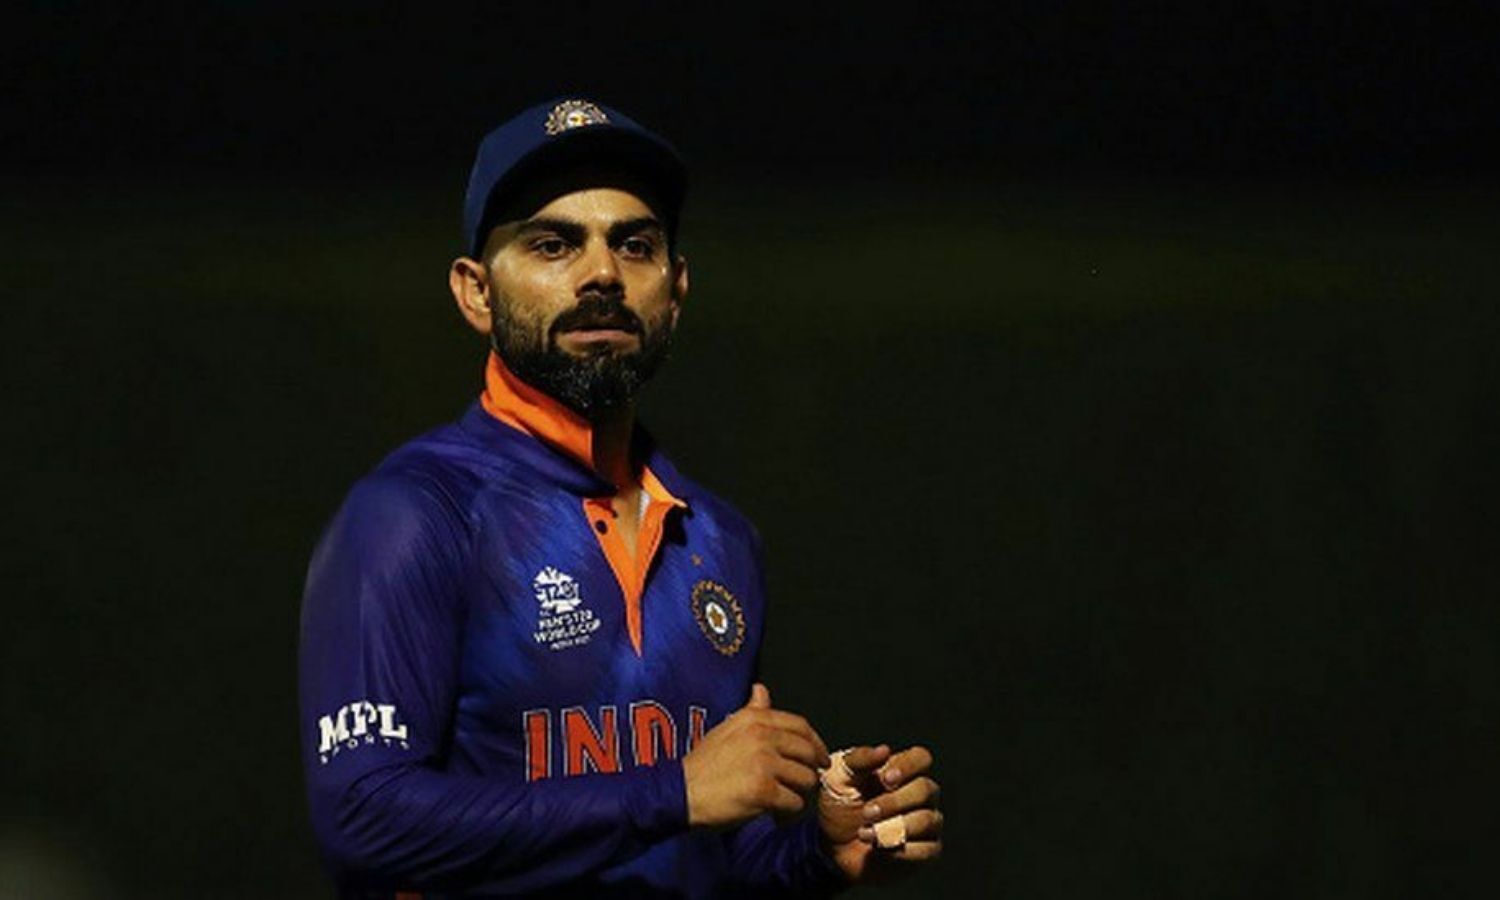 Virat Kohli: Captain who went for win at all costs